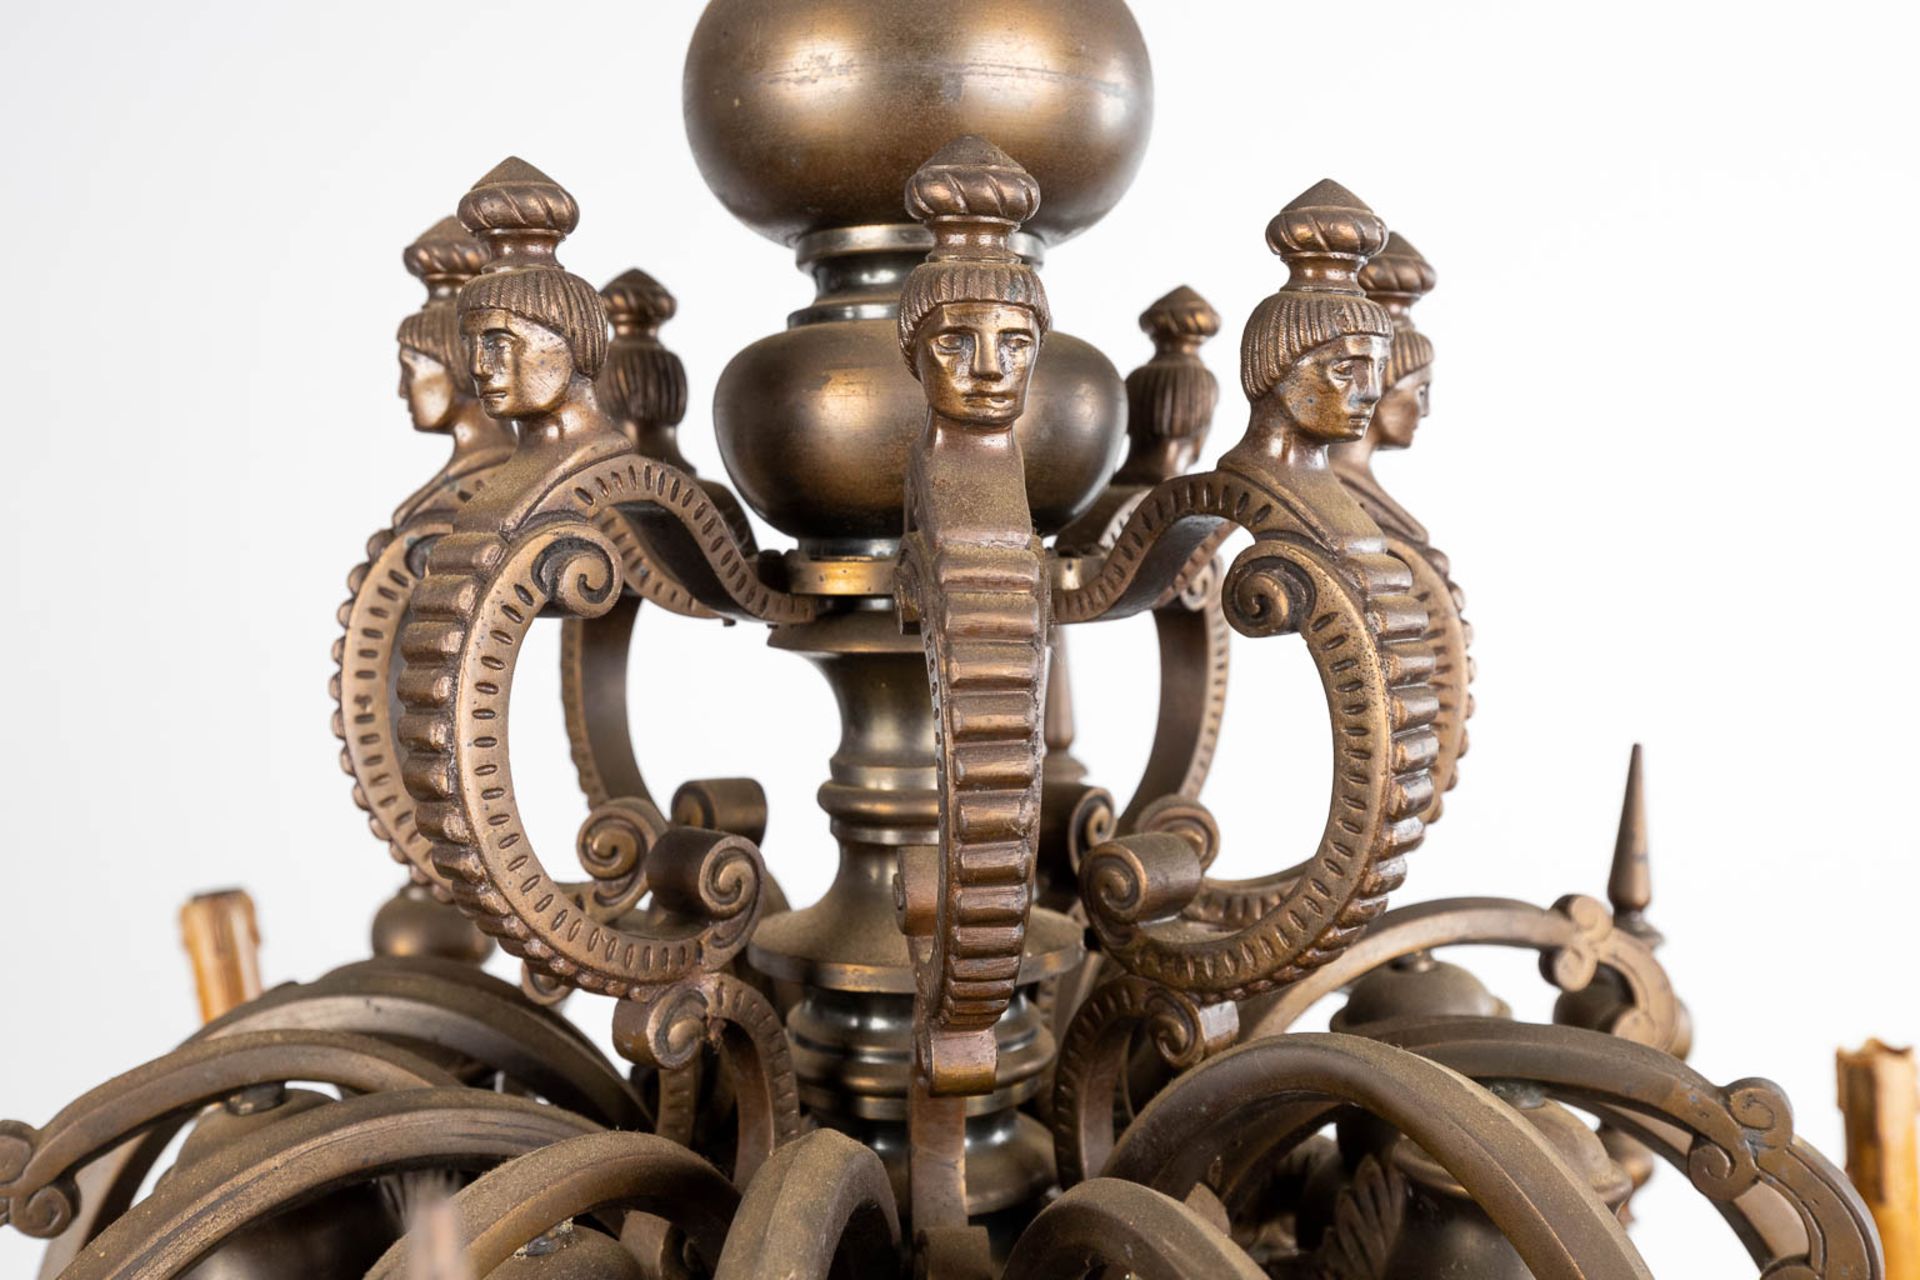 A large Flemish chandelier made of bronze, decorated with a figurine riding a mythological creature. - Bild 6 aus 11